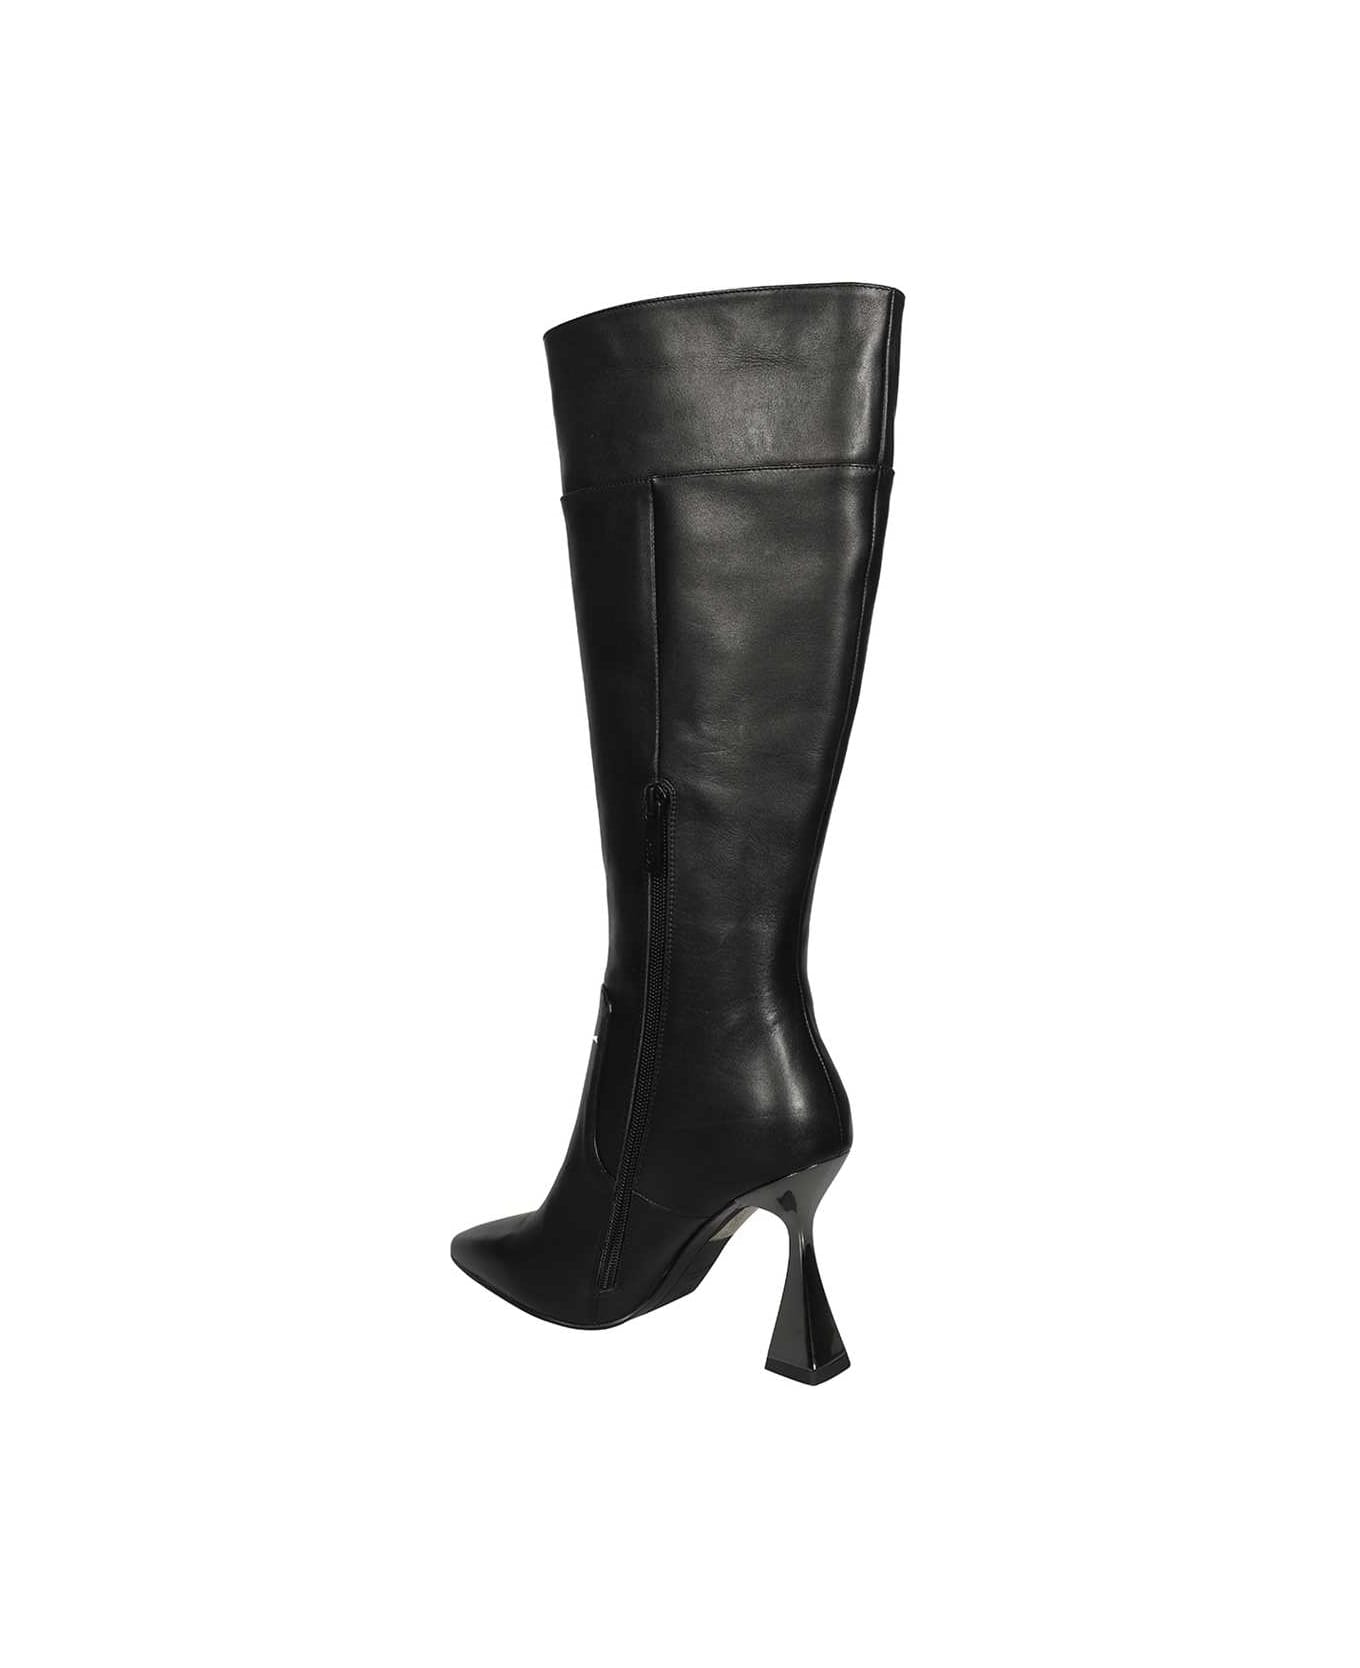 Karl Lagerfeld Leather Boots - black ブーツ